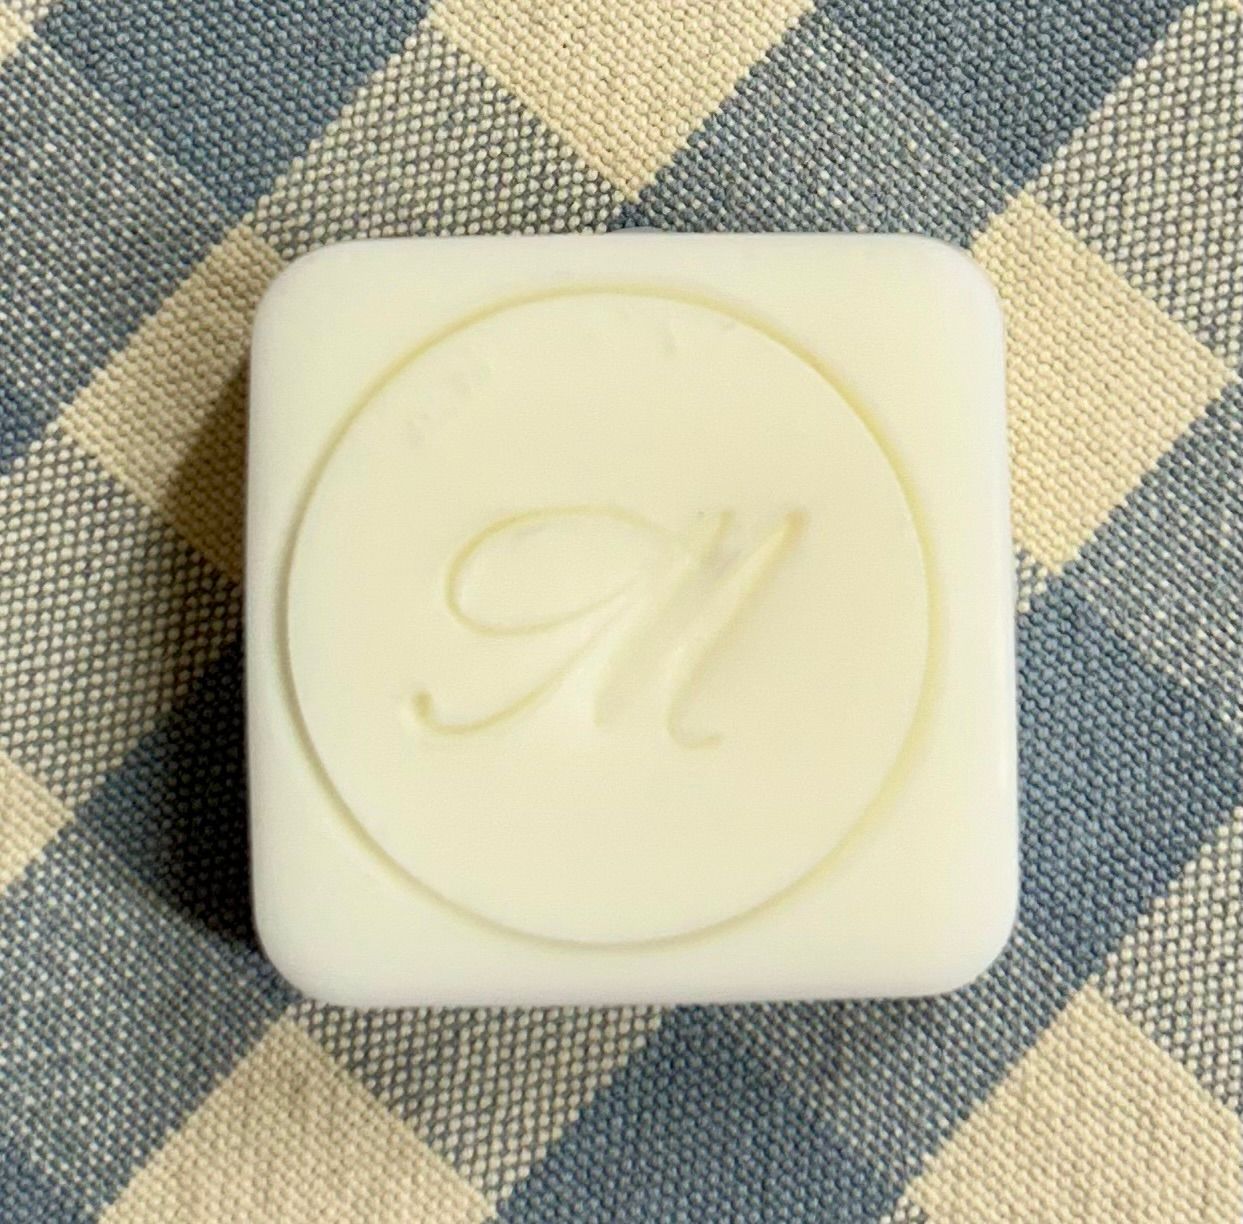 Lavender and May Chang Mini Soap (approx 20g)